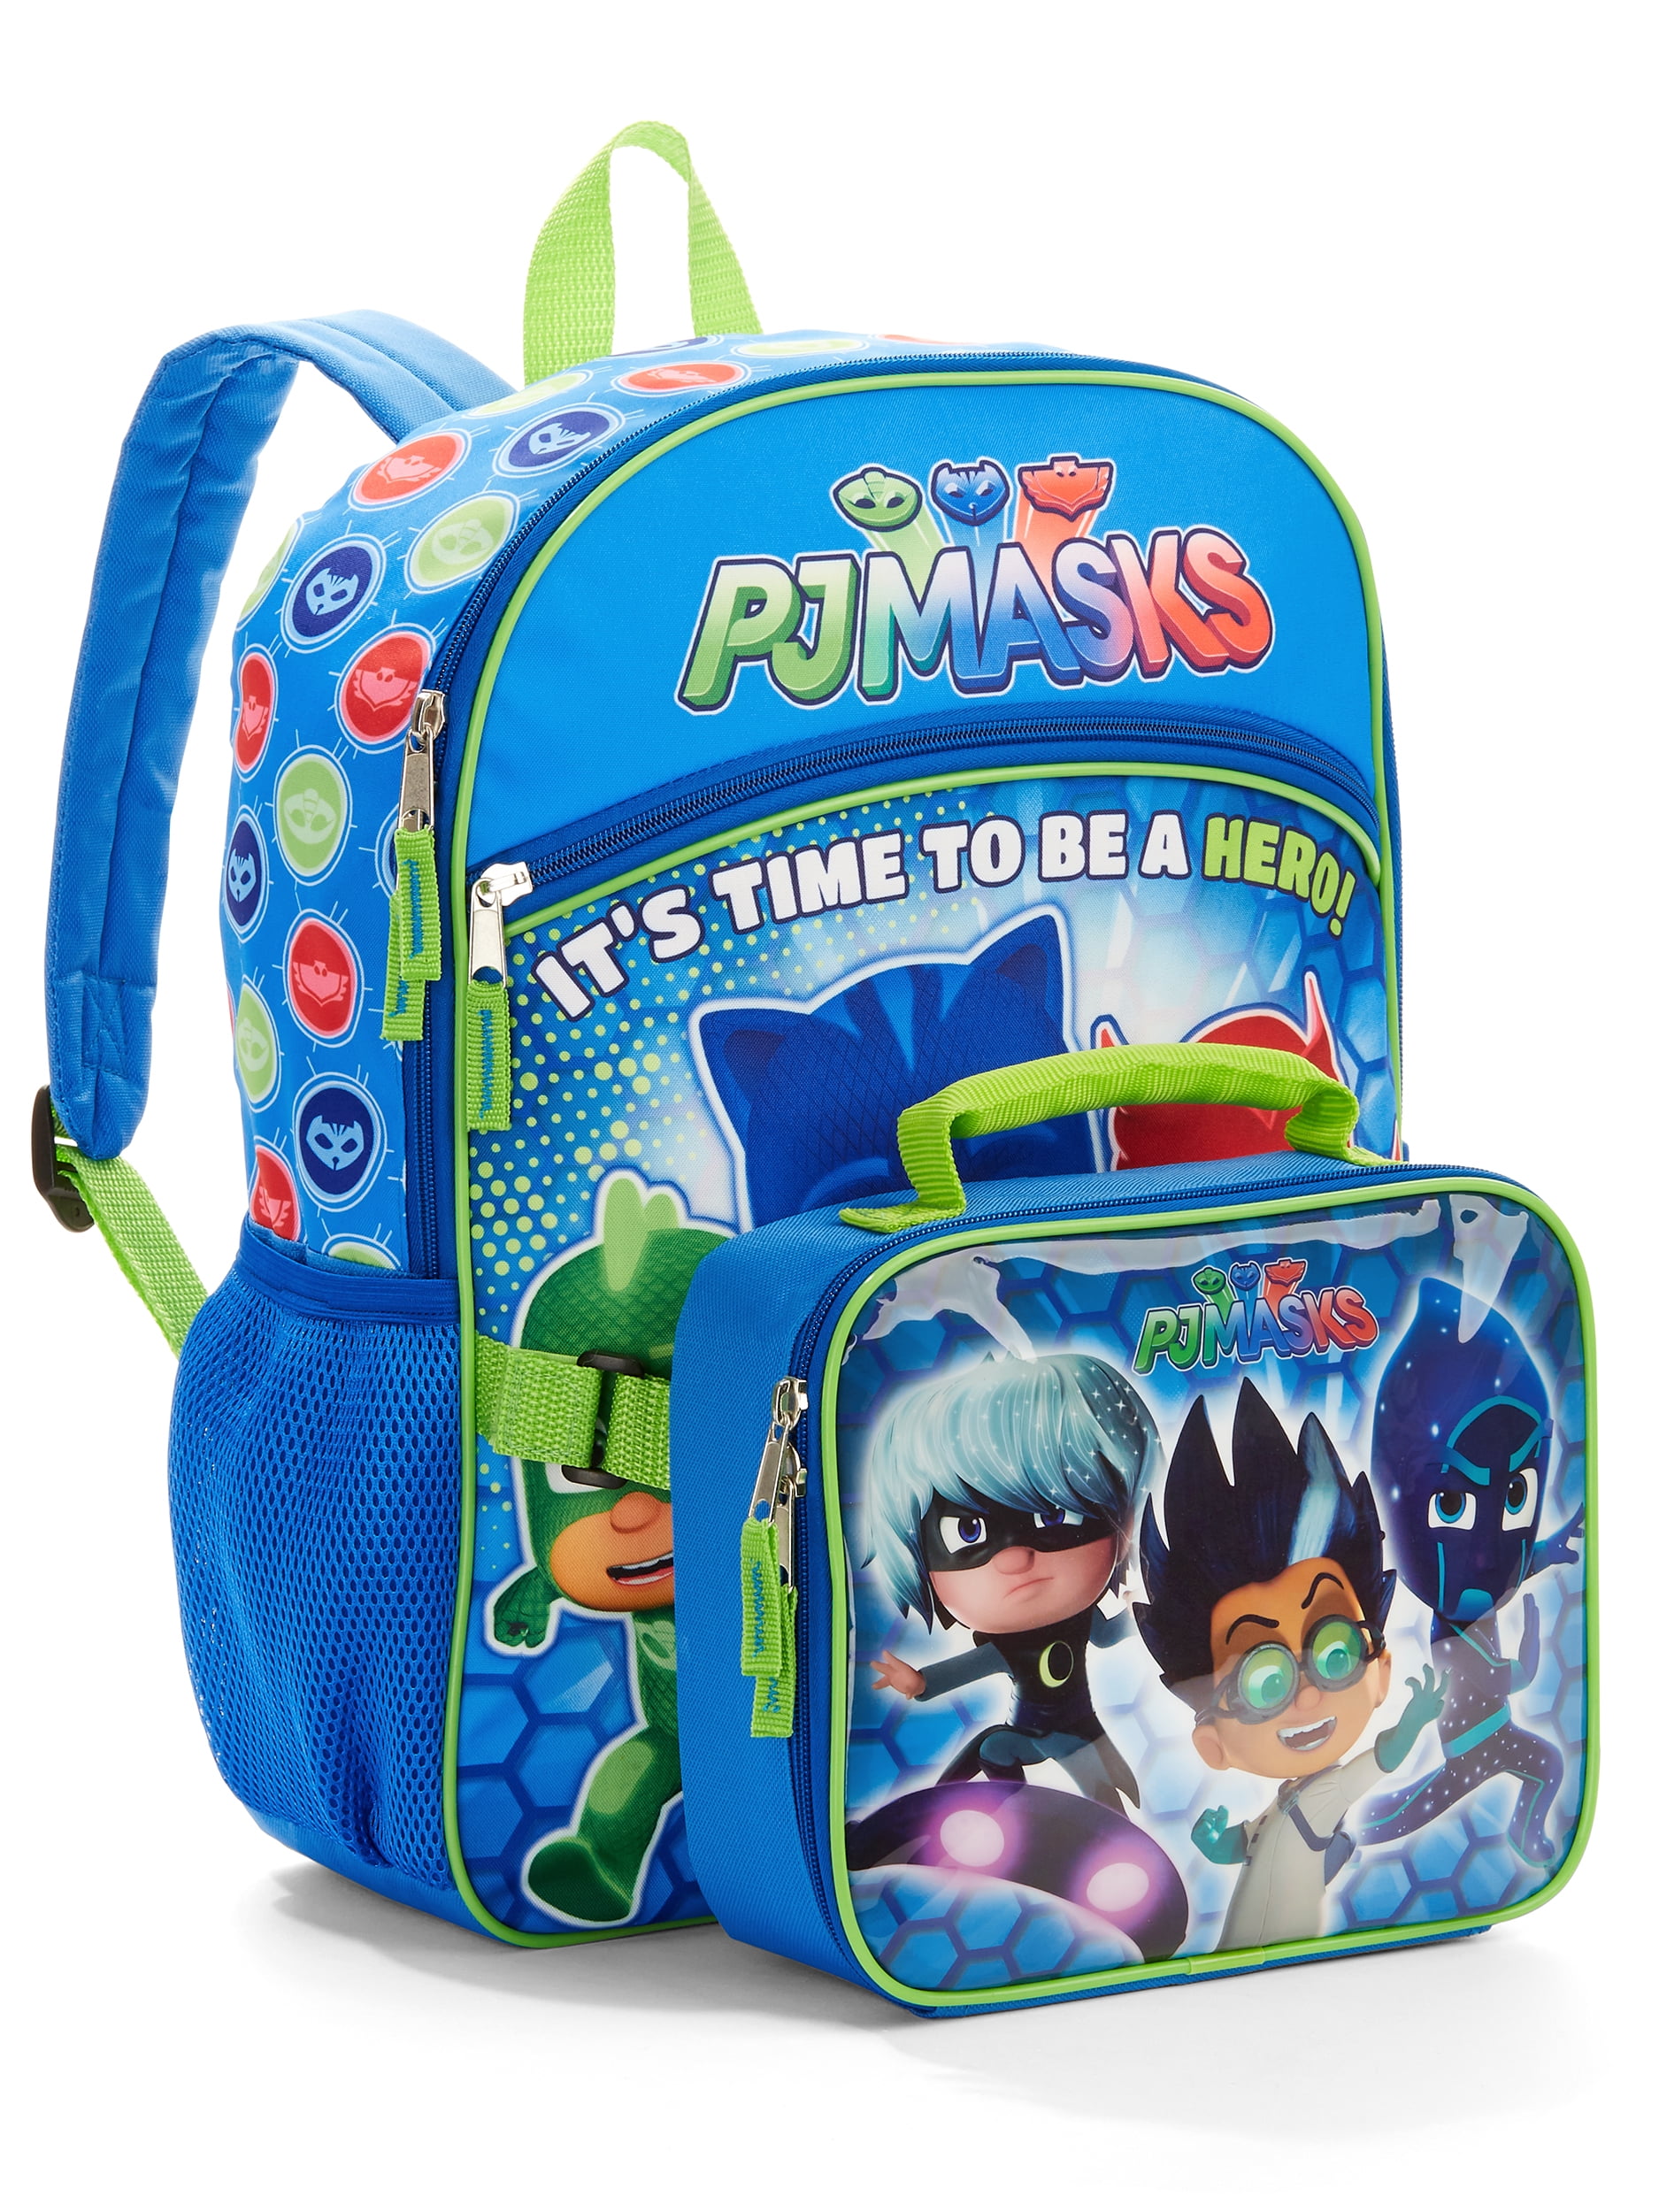 PJ Masks 12" School Backpack with Lunch Bag Time To Save The Day 